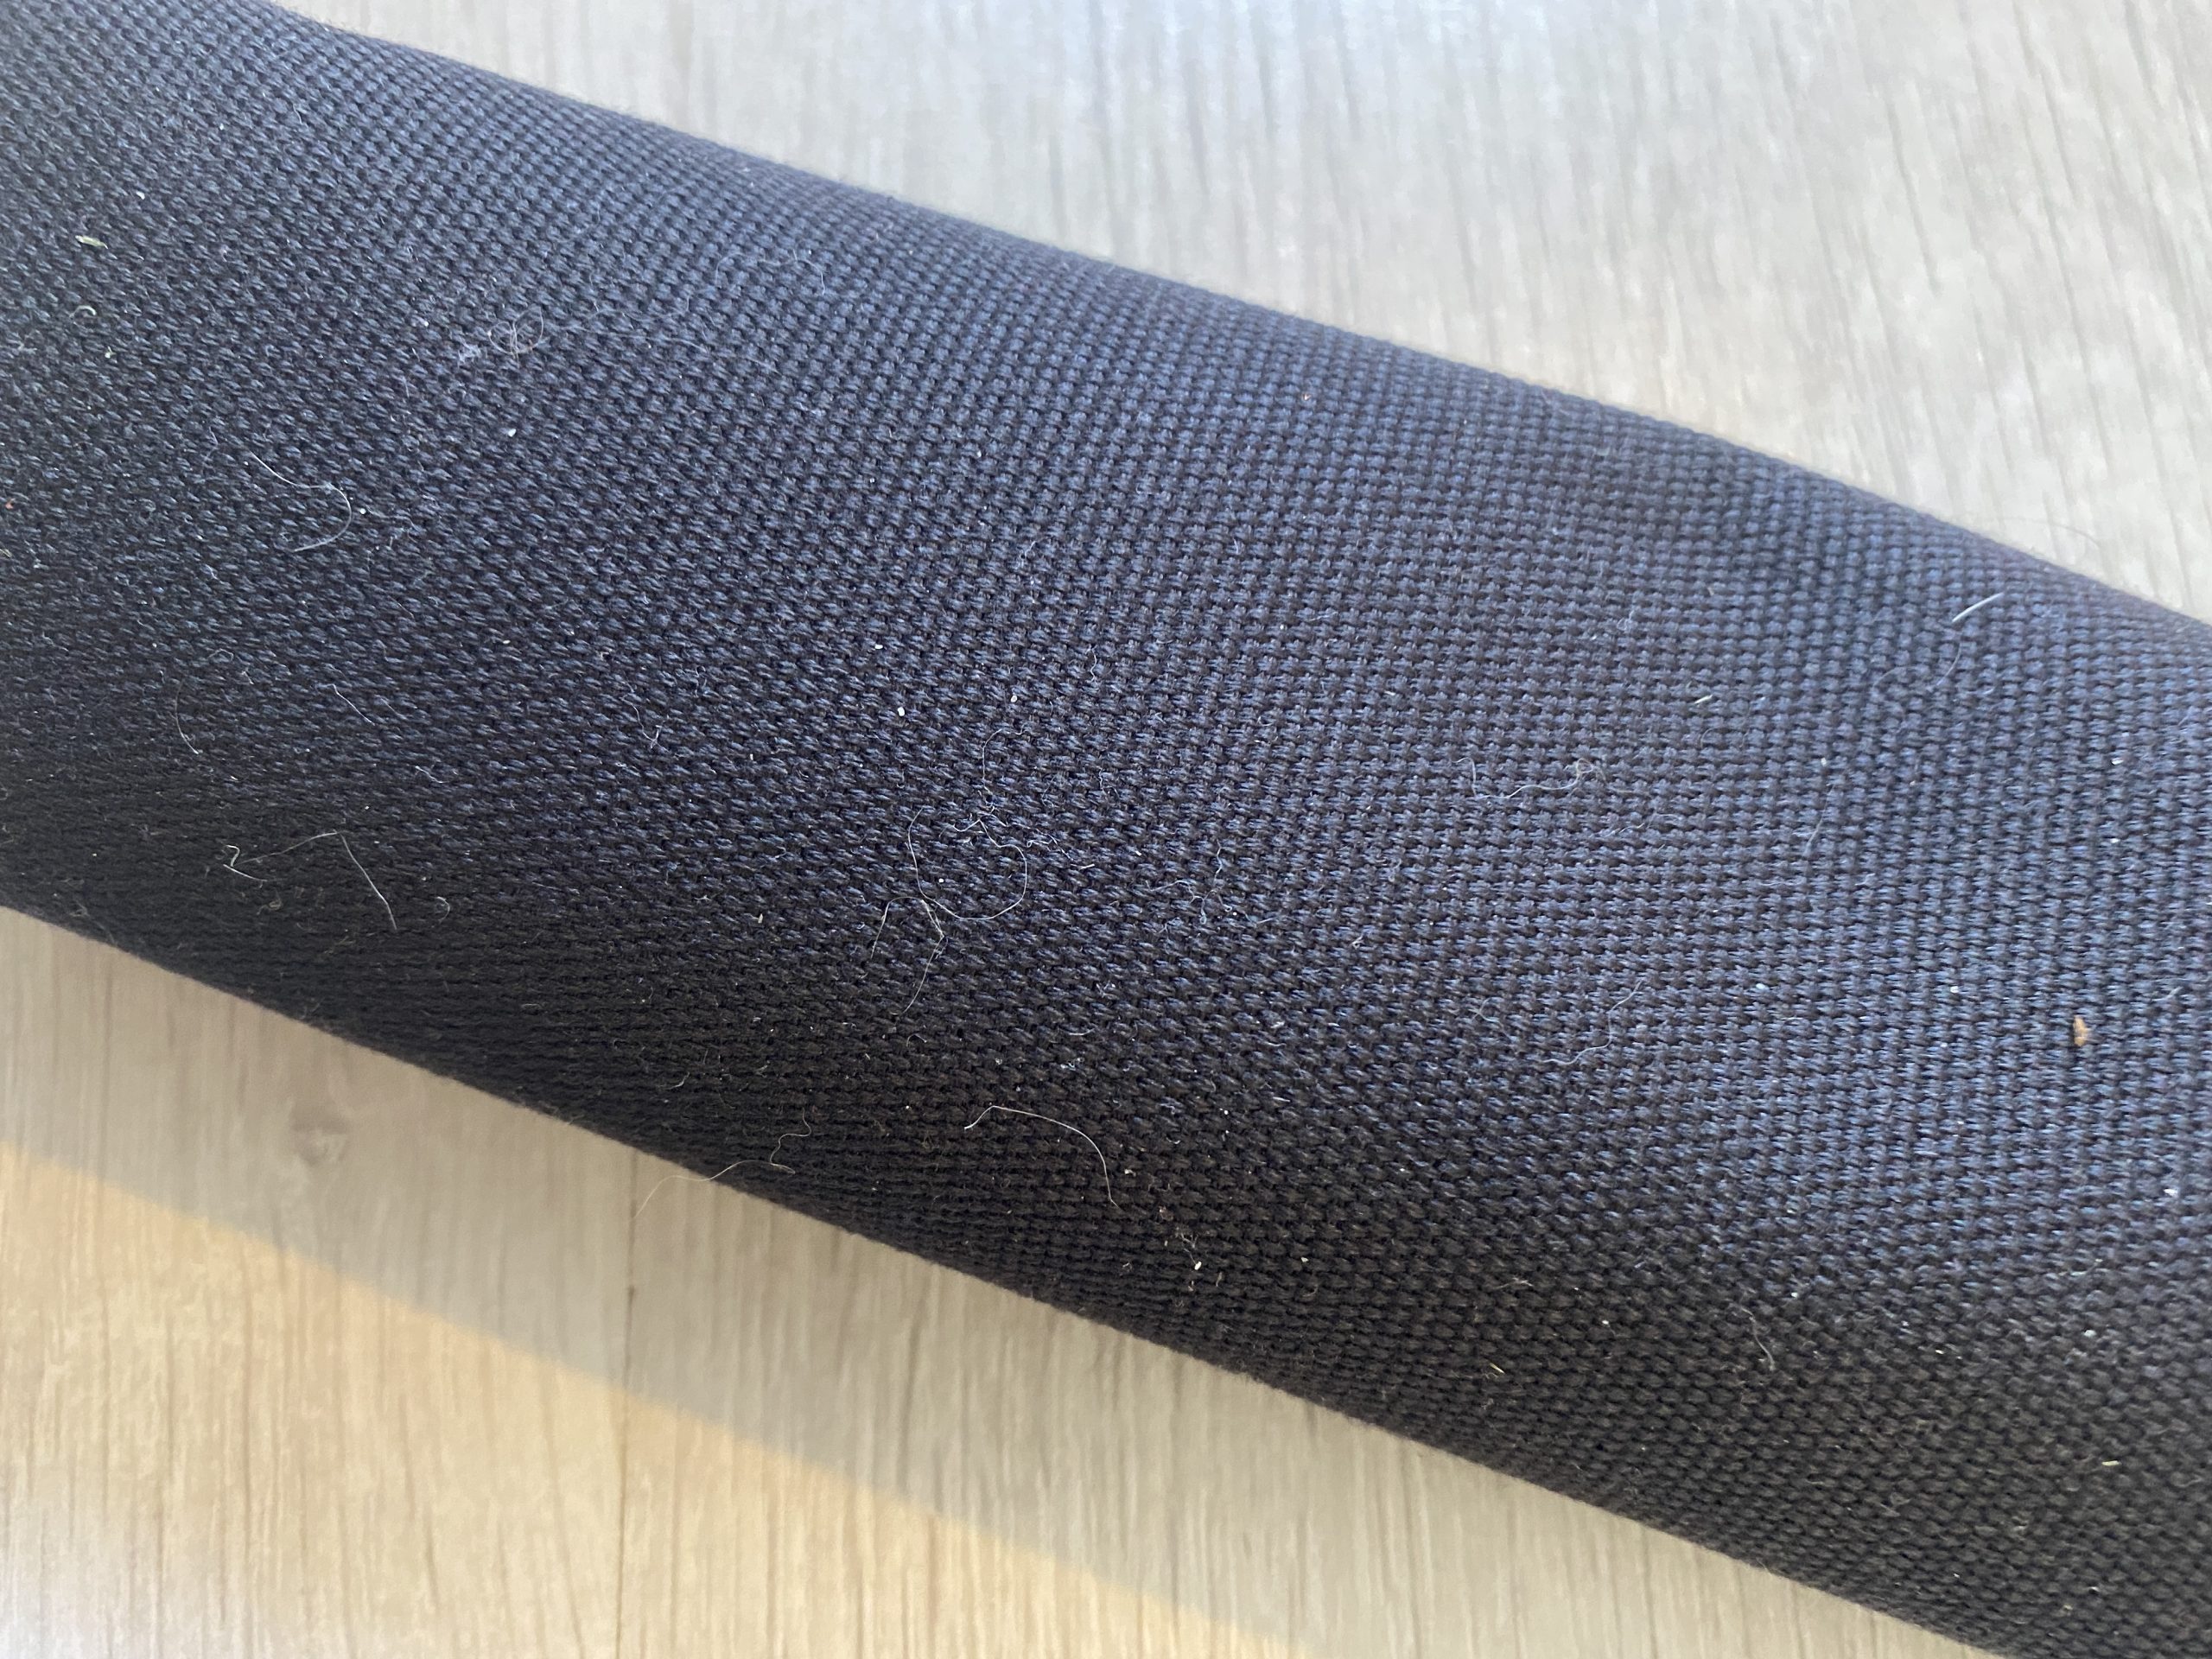 Bellroy Pencil Case Review Material